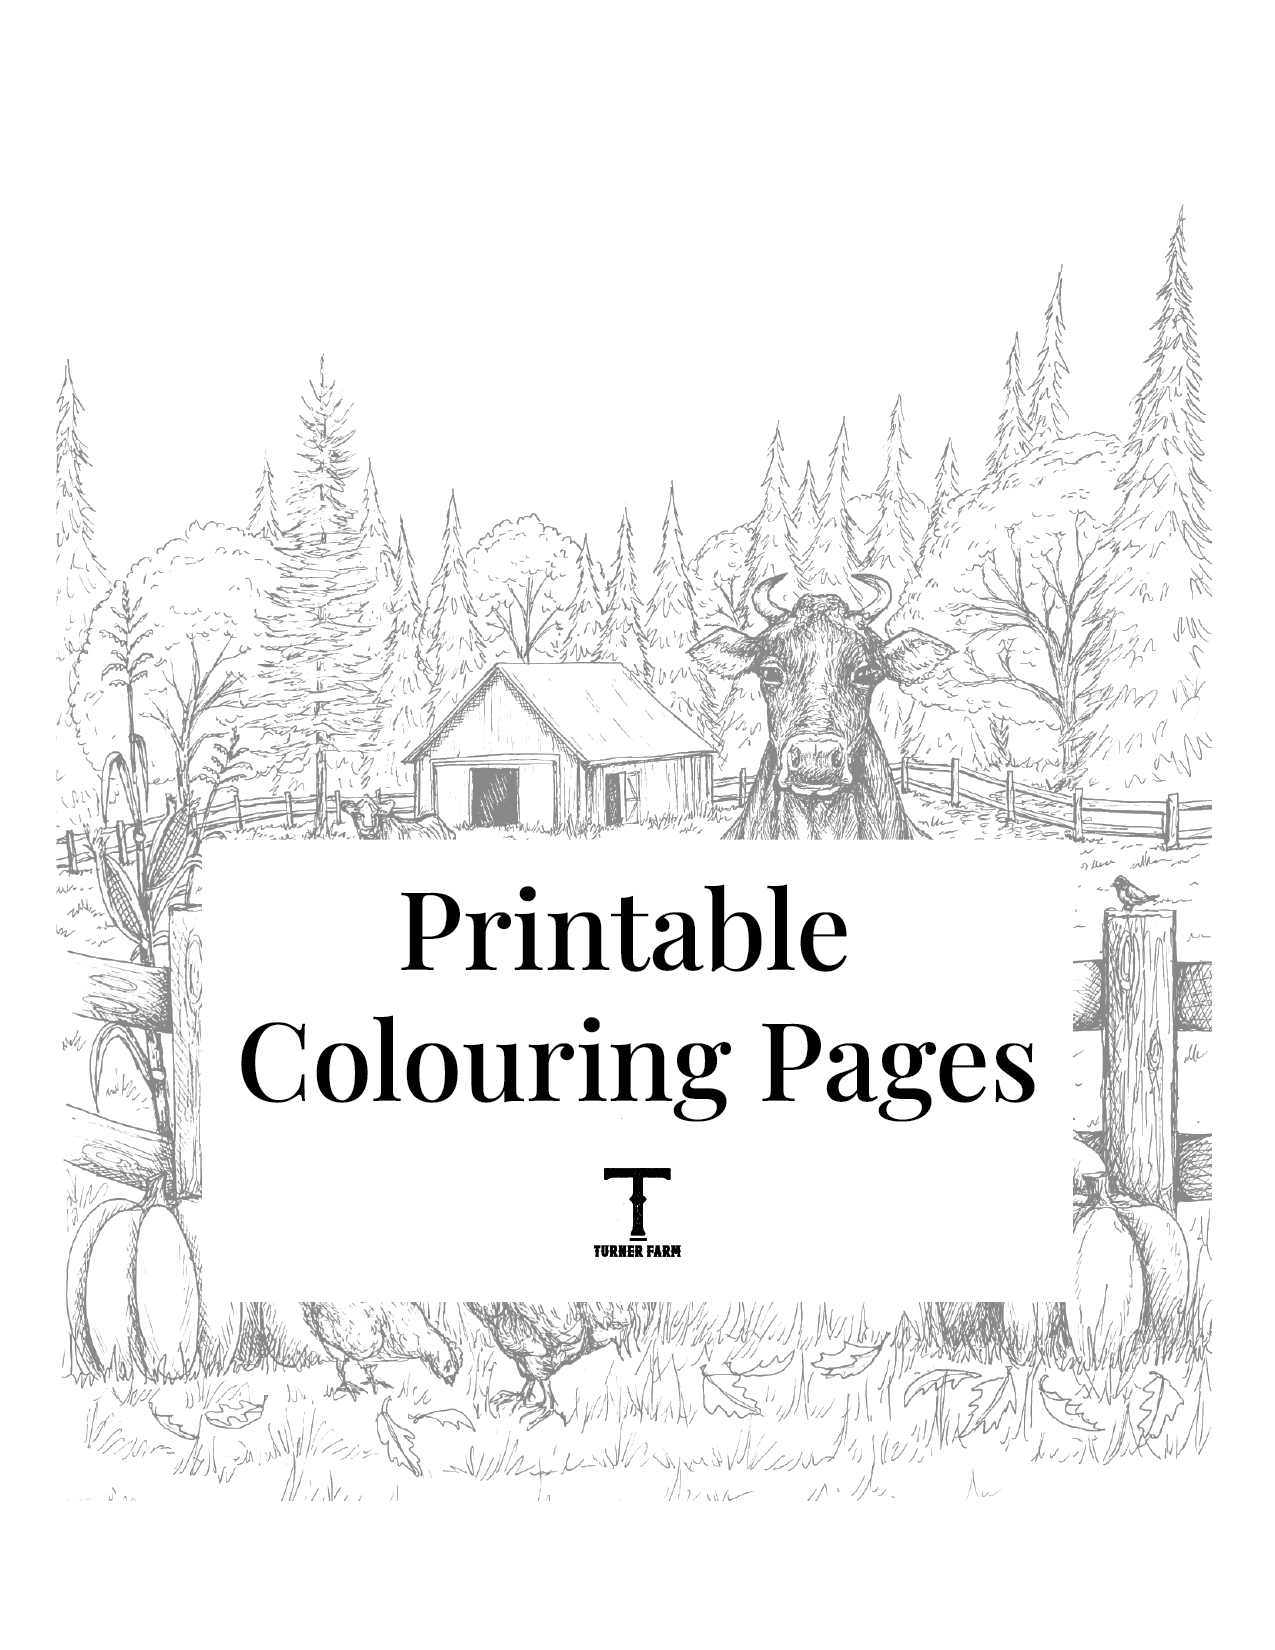 Printable Colouring Pages